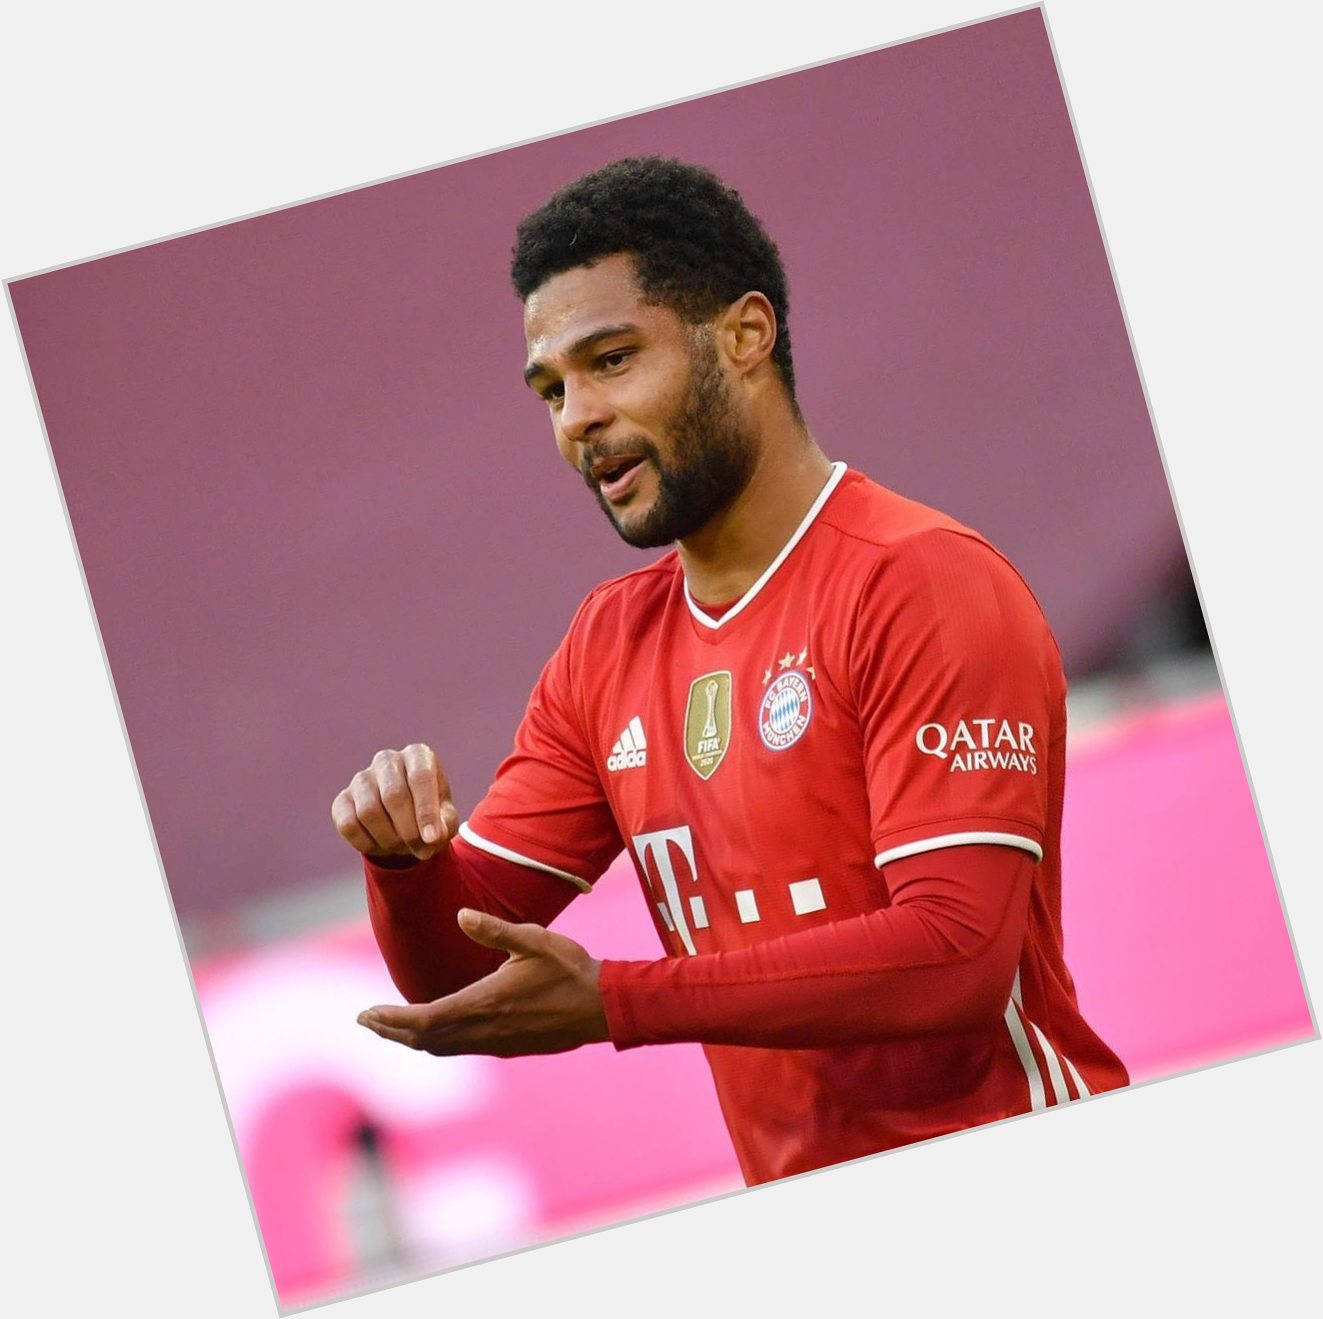 Happy Birthday to my older brother Serge Gnabry who turns 27 today 